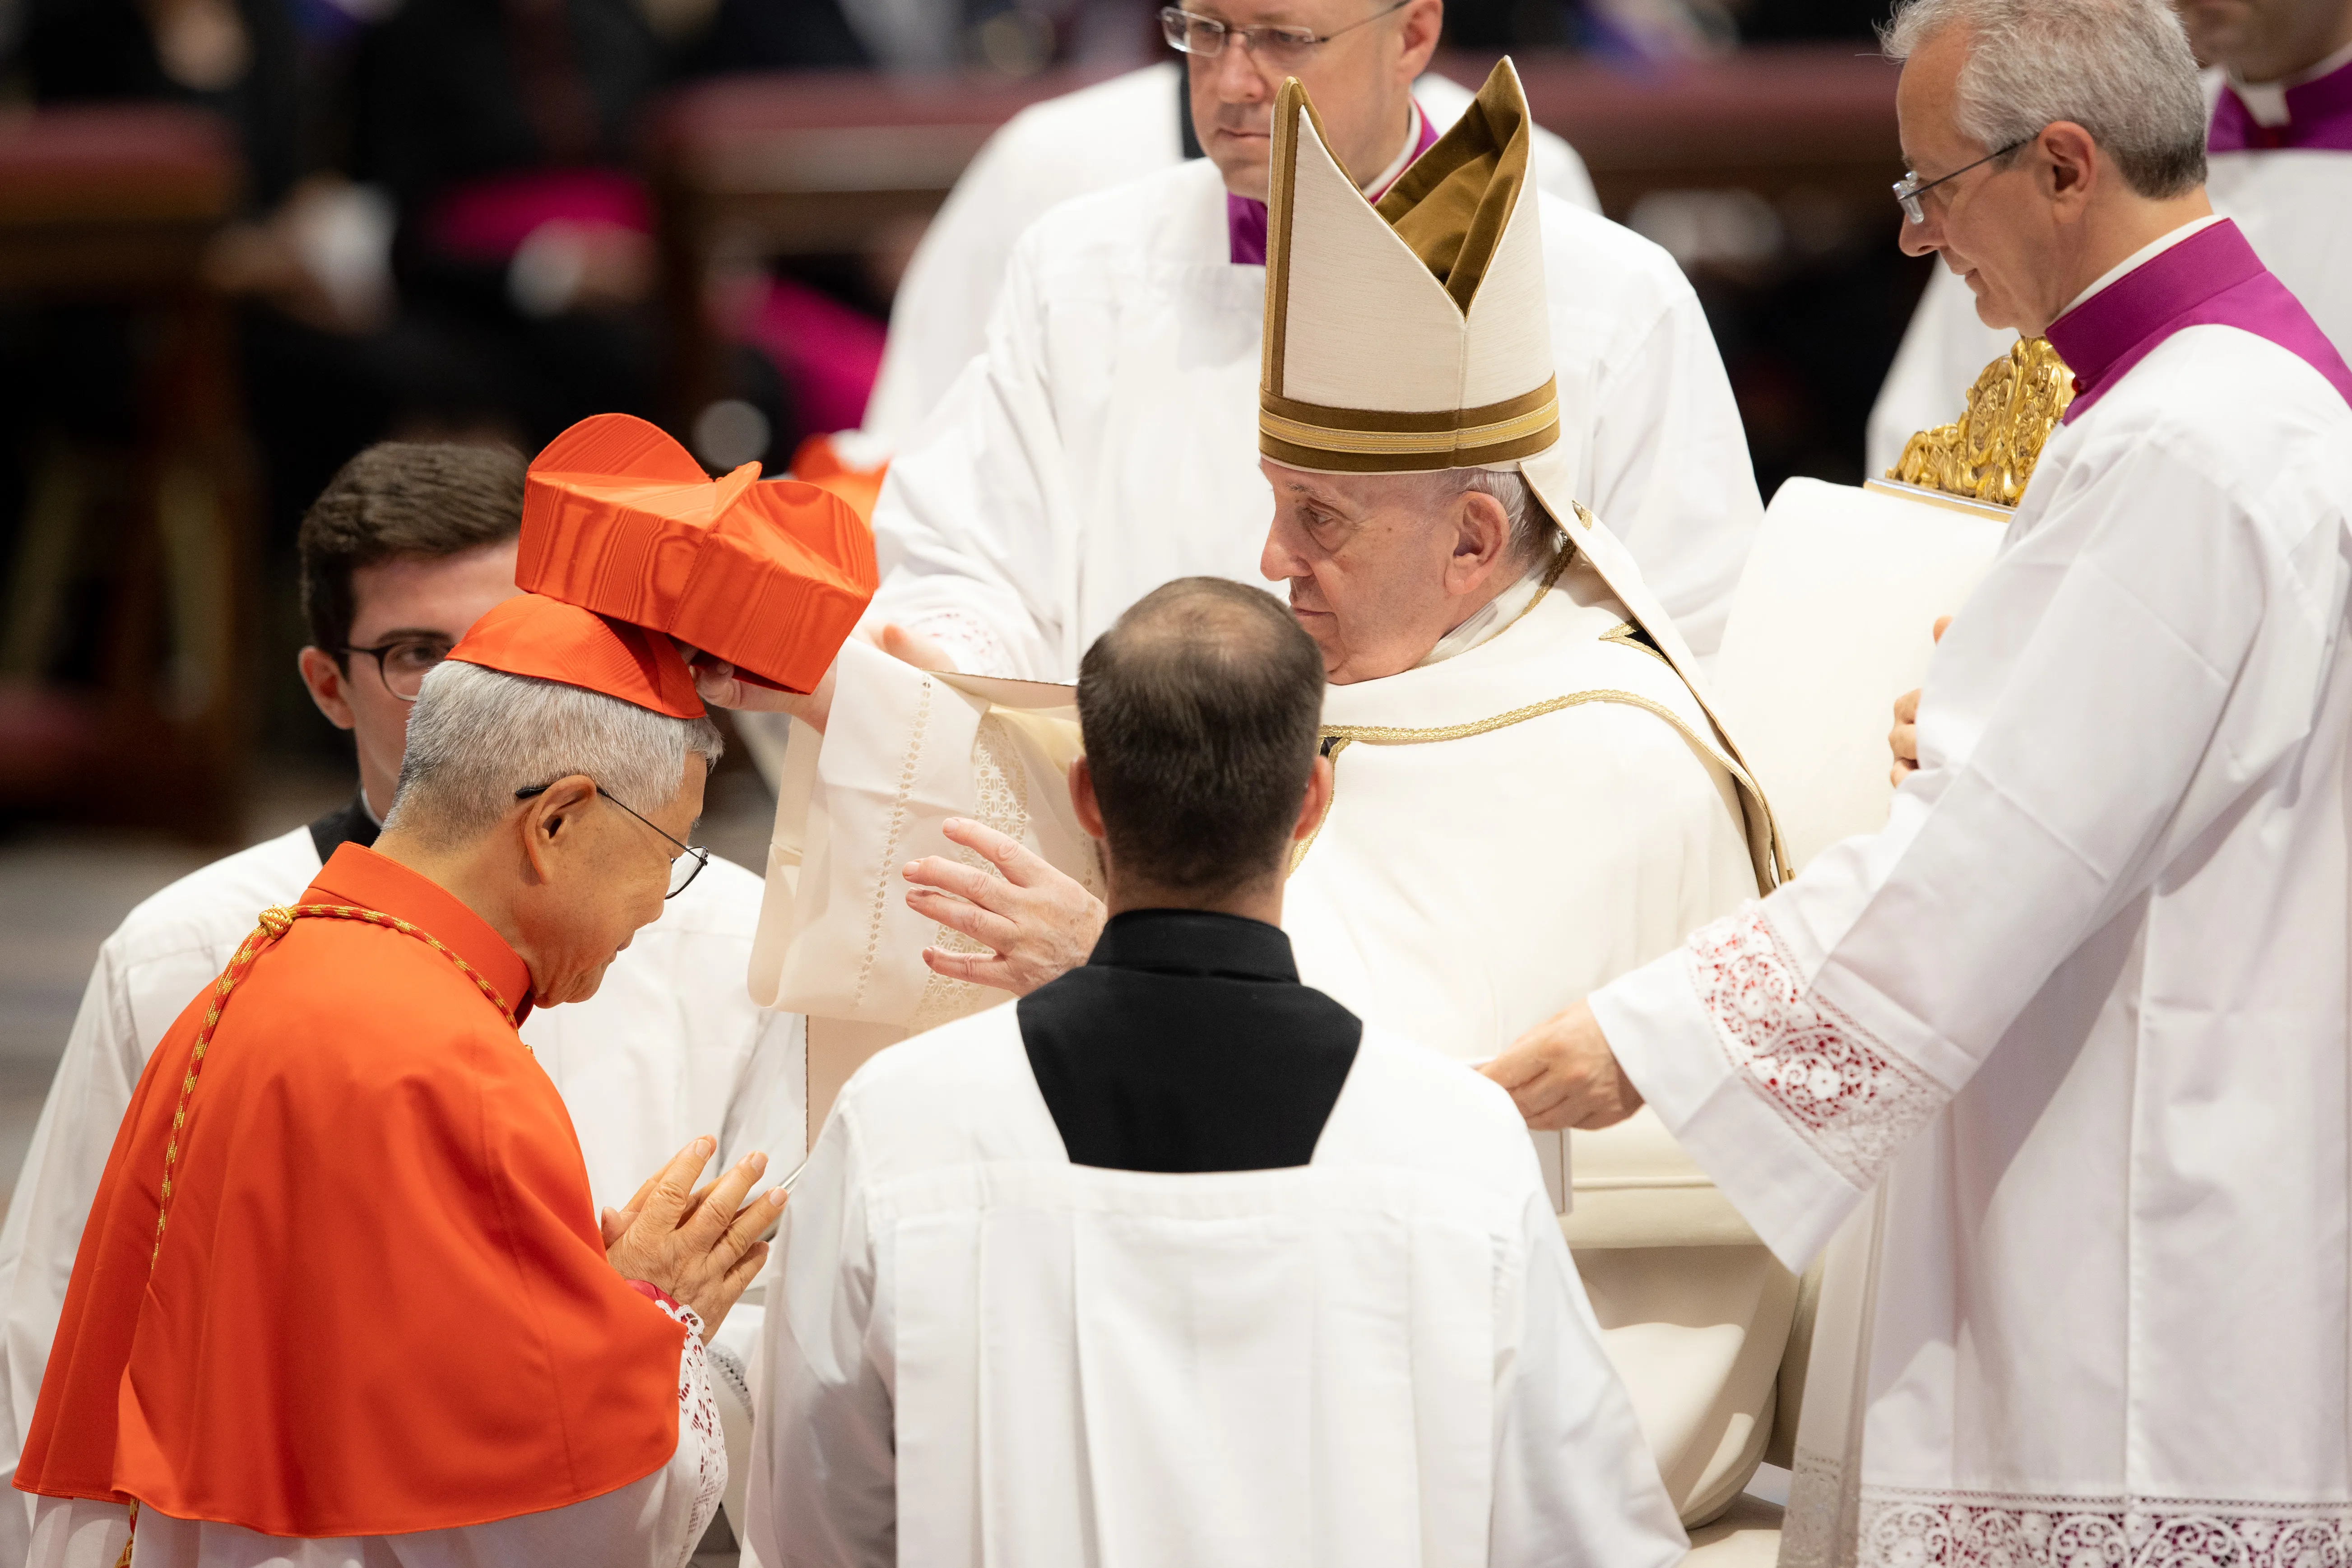 Cardinal Lazarus You Heung-sik receiving the scarlet biretta from Pope Francis in St. Peter's Basilica on Aug. 27, 2022. Daniel Ibáñez / CNA